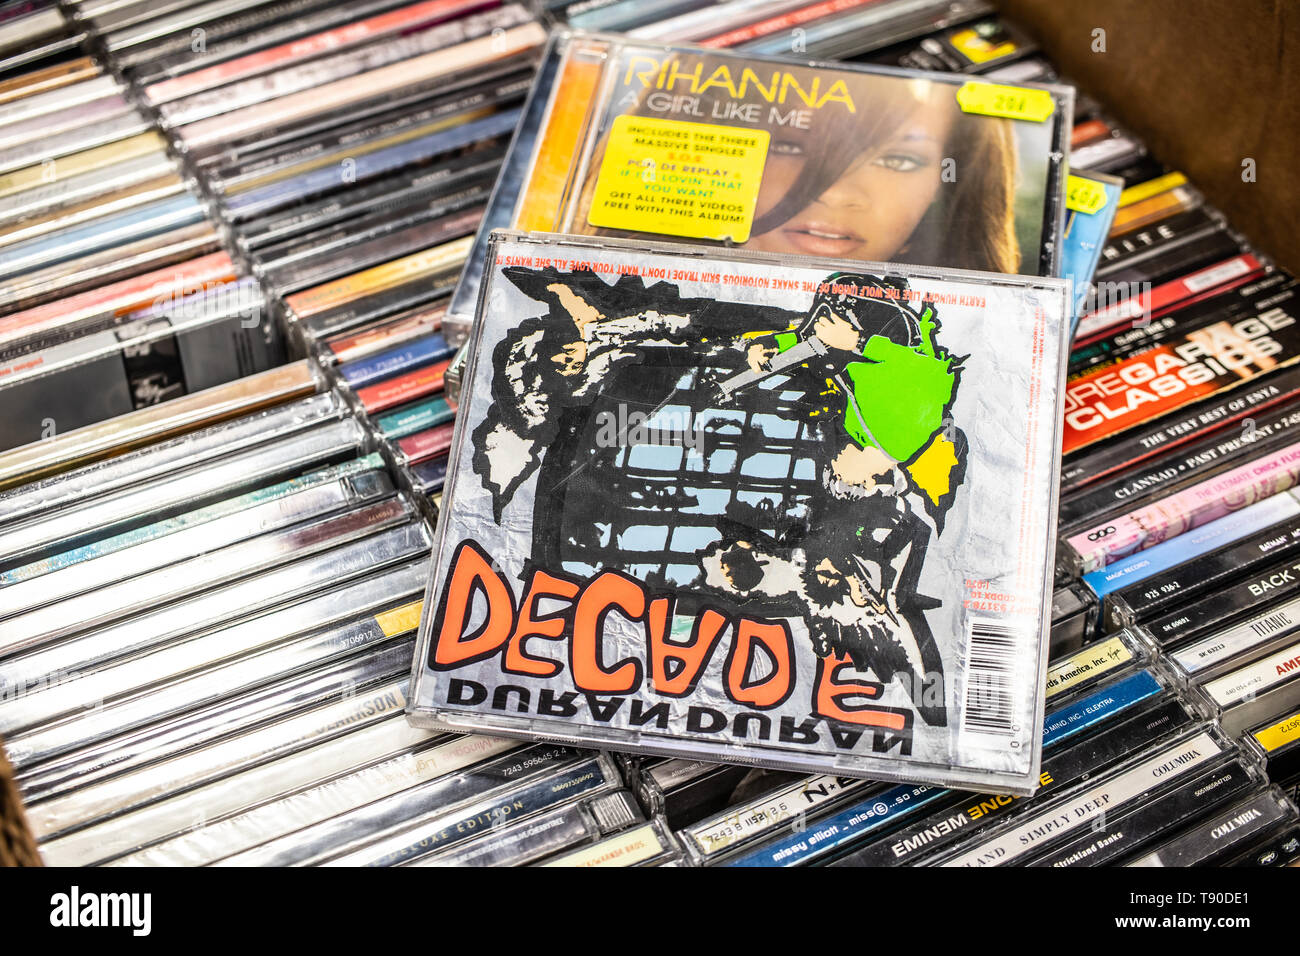 Nadarzyn, Poland, May 11, 2019: Duran Duran CD album Decade: Greatest Hits on display for sale, famous English new wave band, collection of CD music Stock Photo